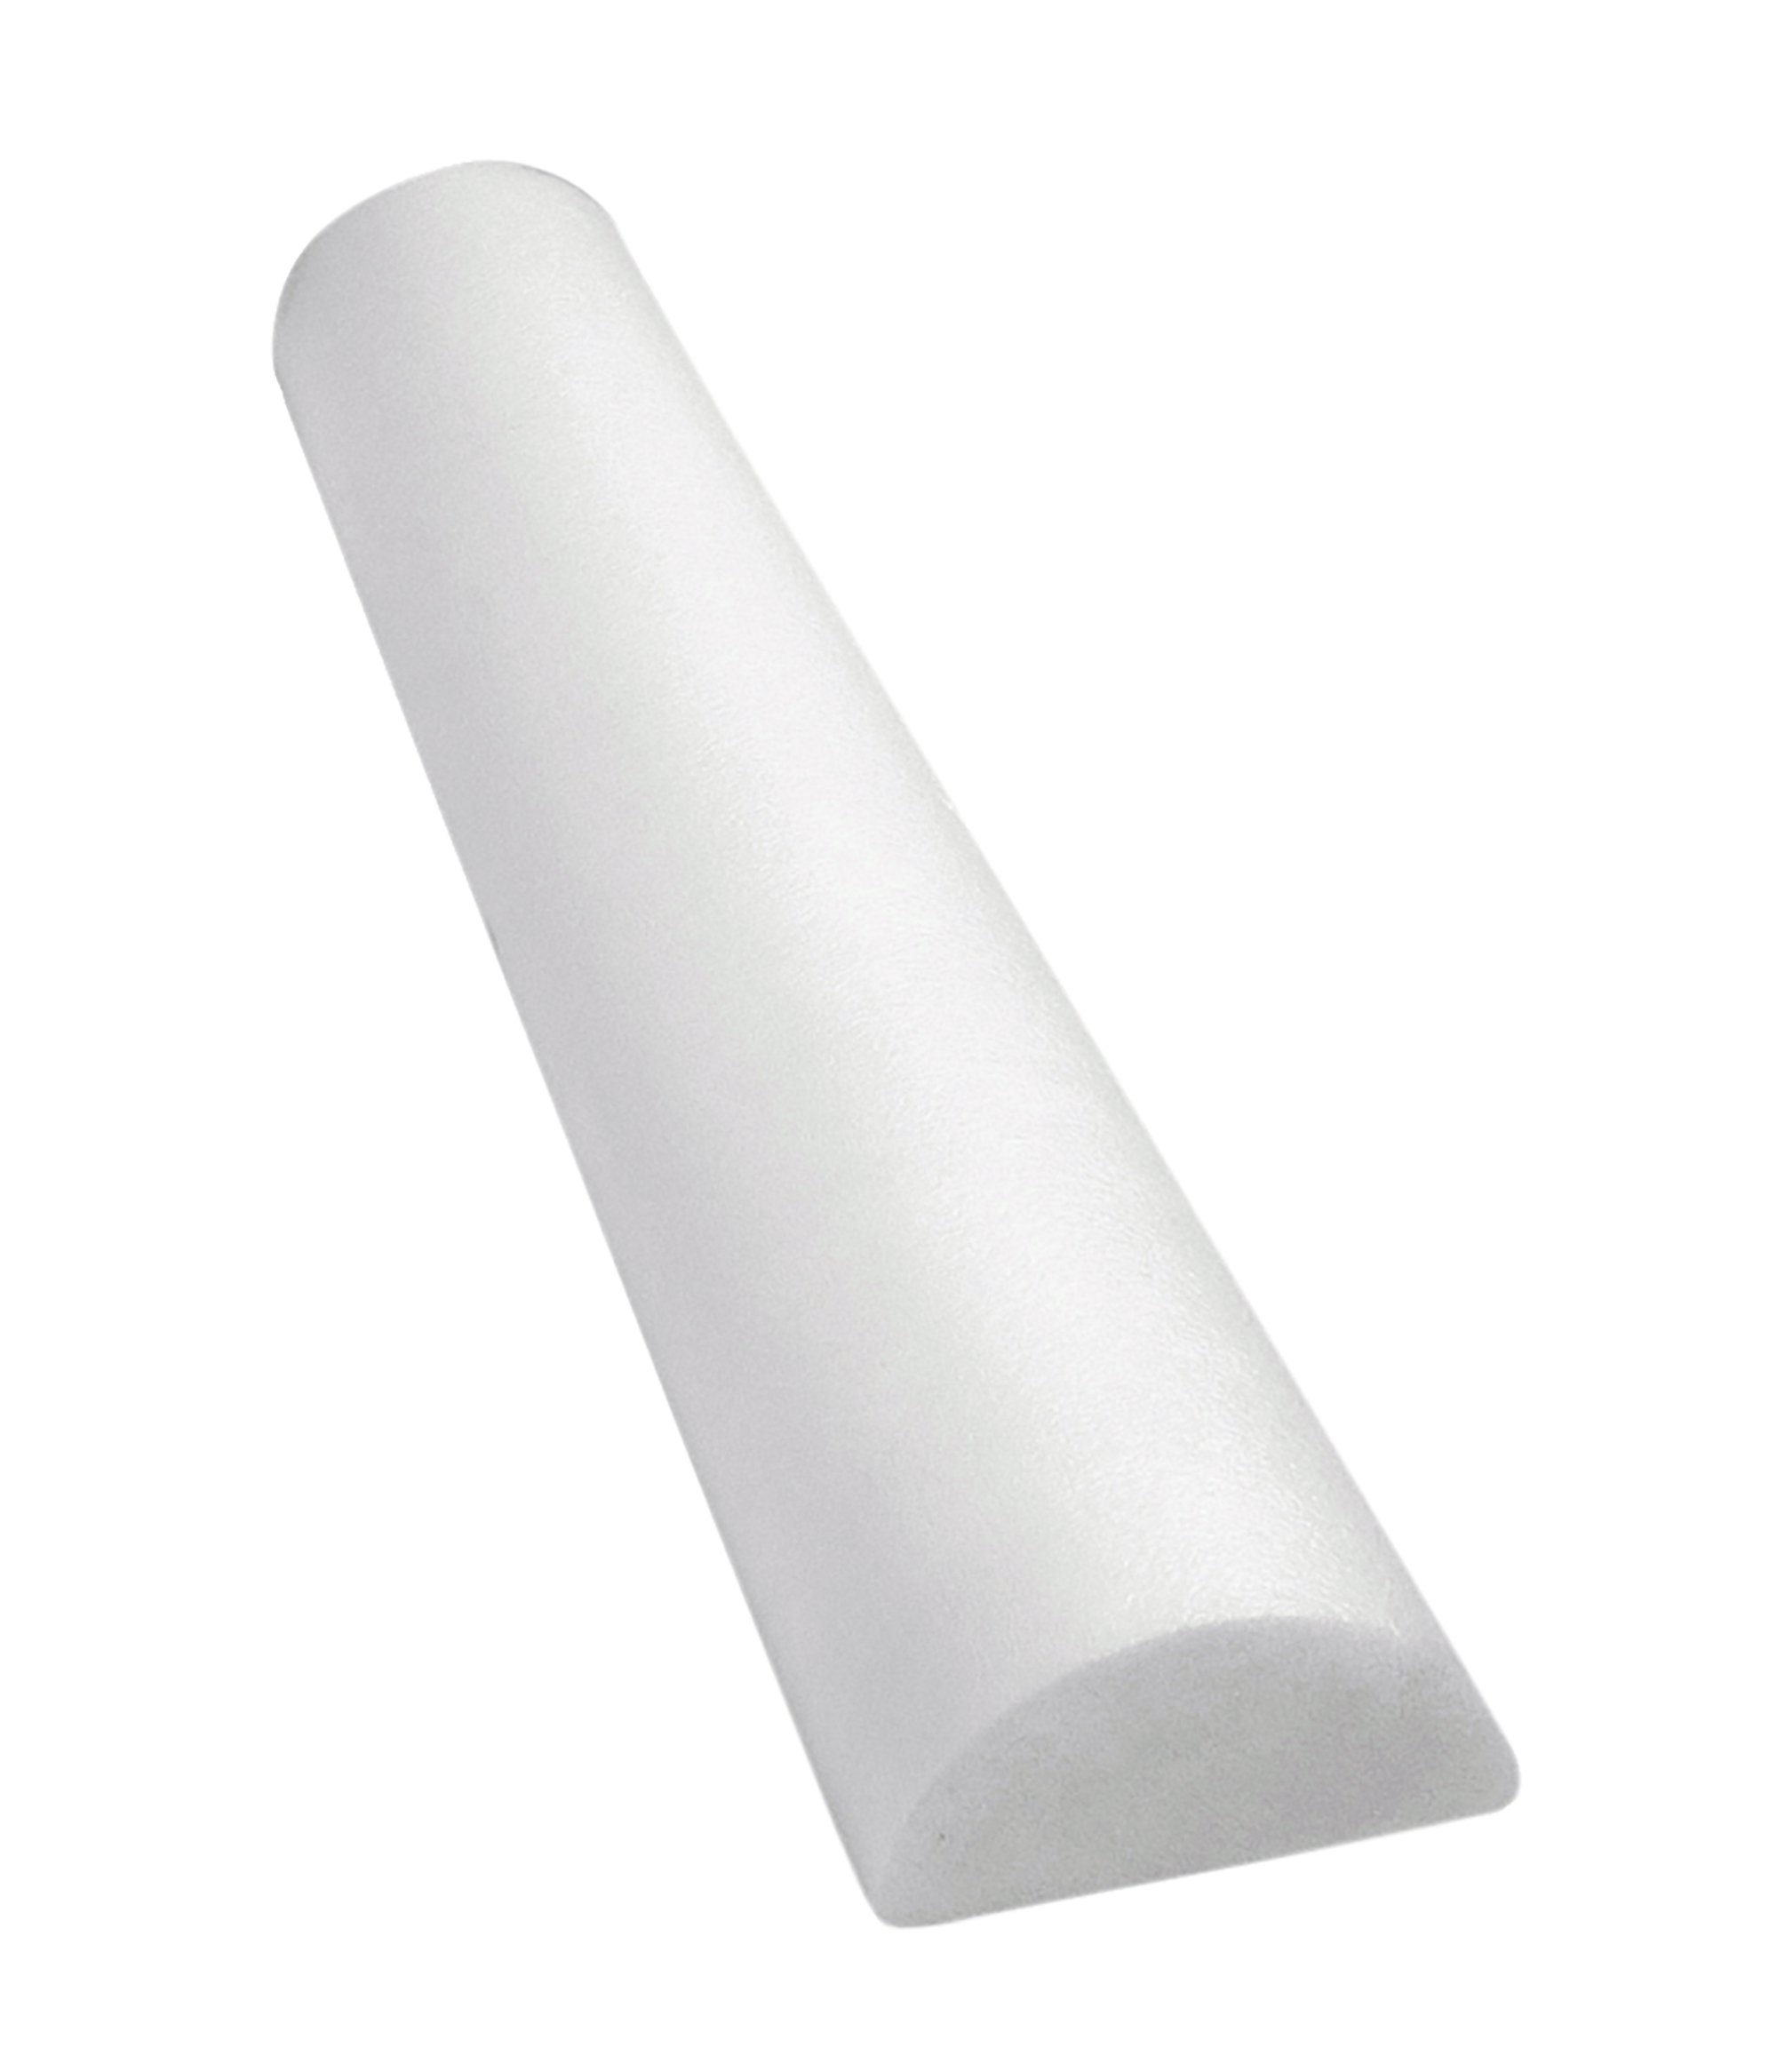 CanDo Full Skin Half-Round Foam Roller, 6 Inches by 12 Inches